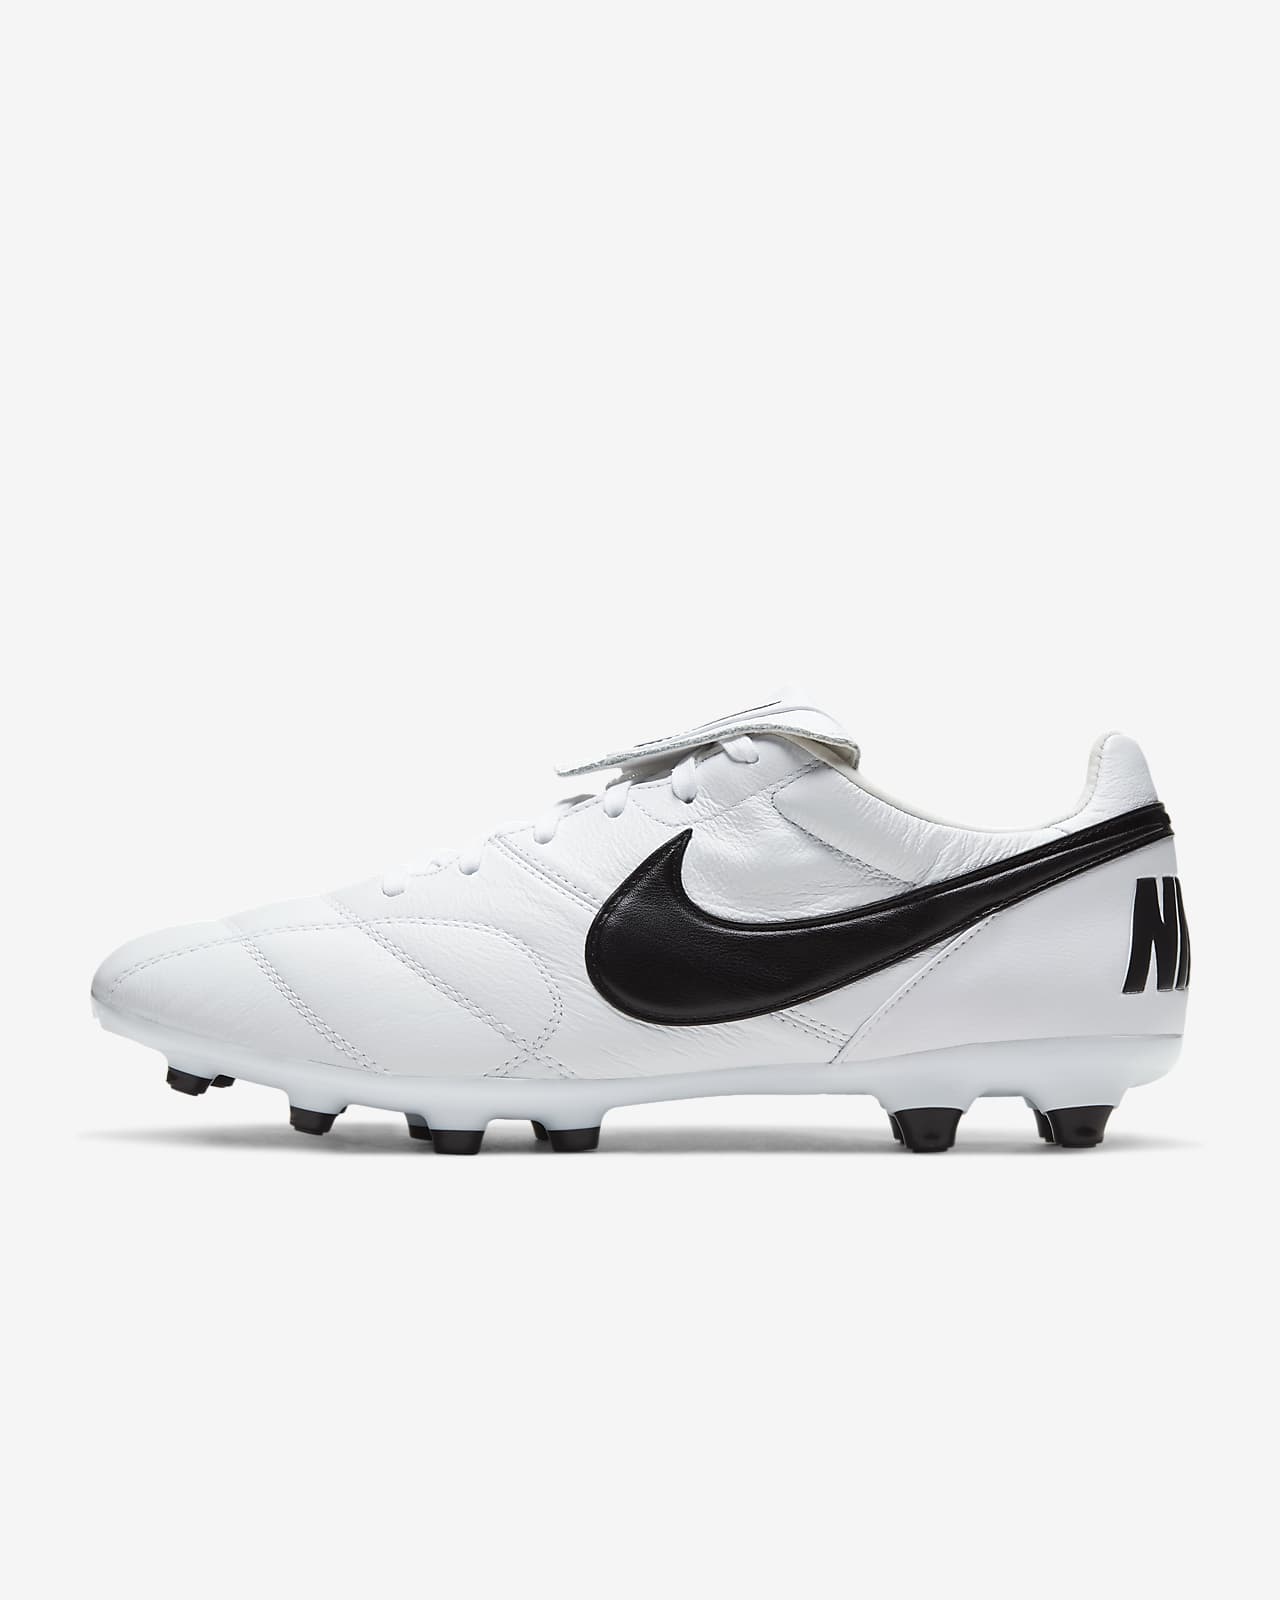 Nike Premier Boots Hot Sale, UP TO 60% OFF